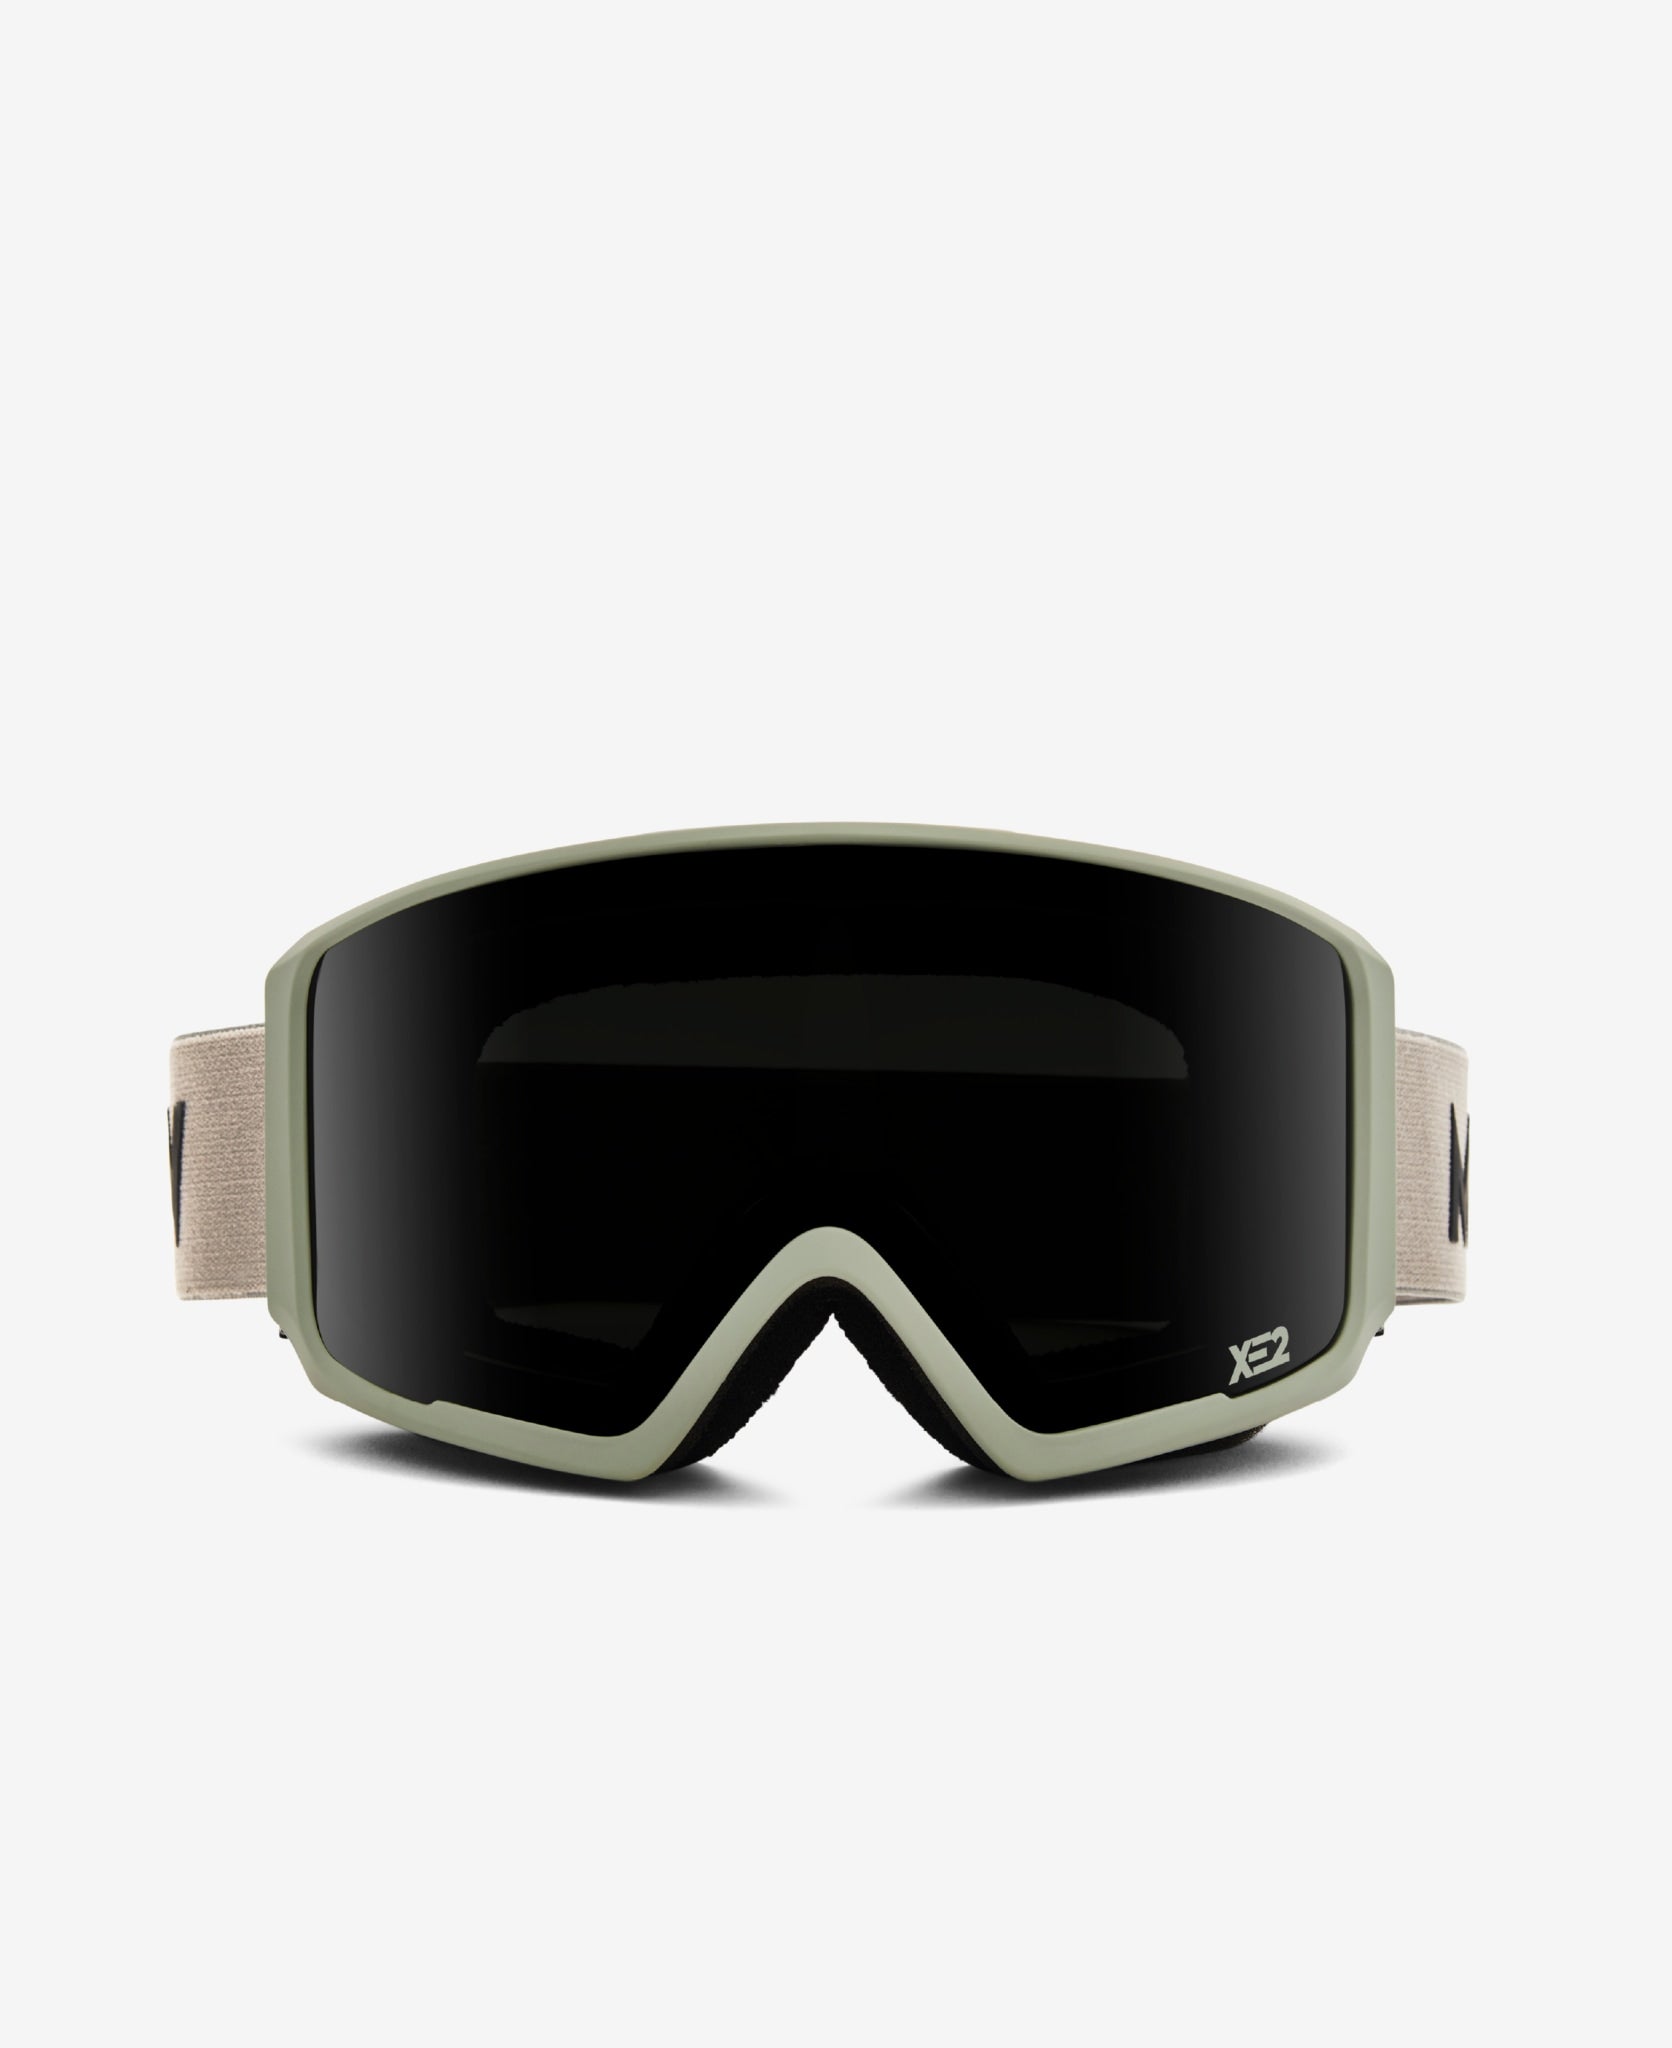 MessyWeekend - Snow Goggles | High Contrast, Magnetic & Photochromic